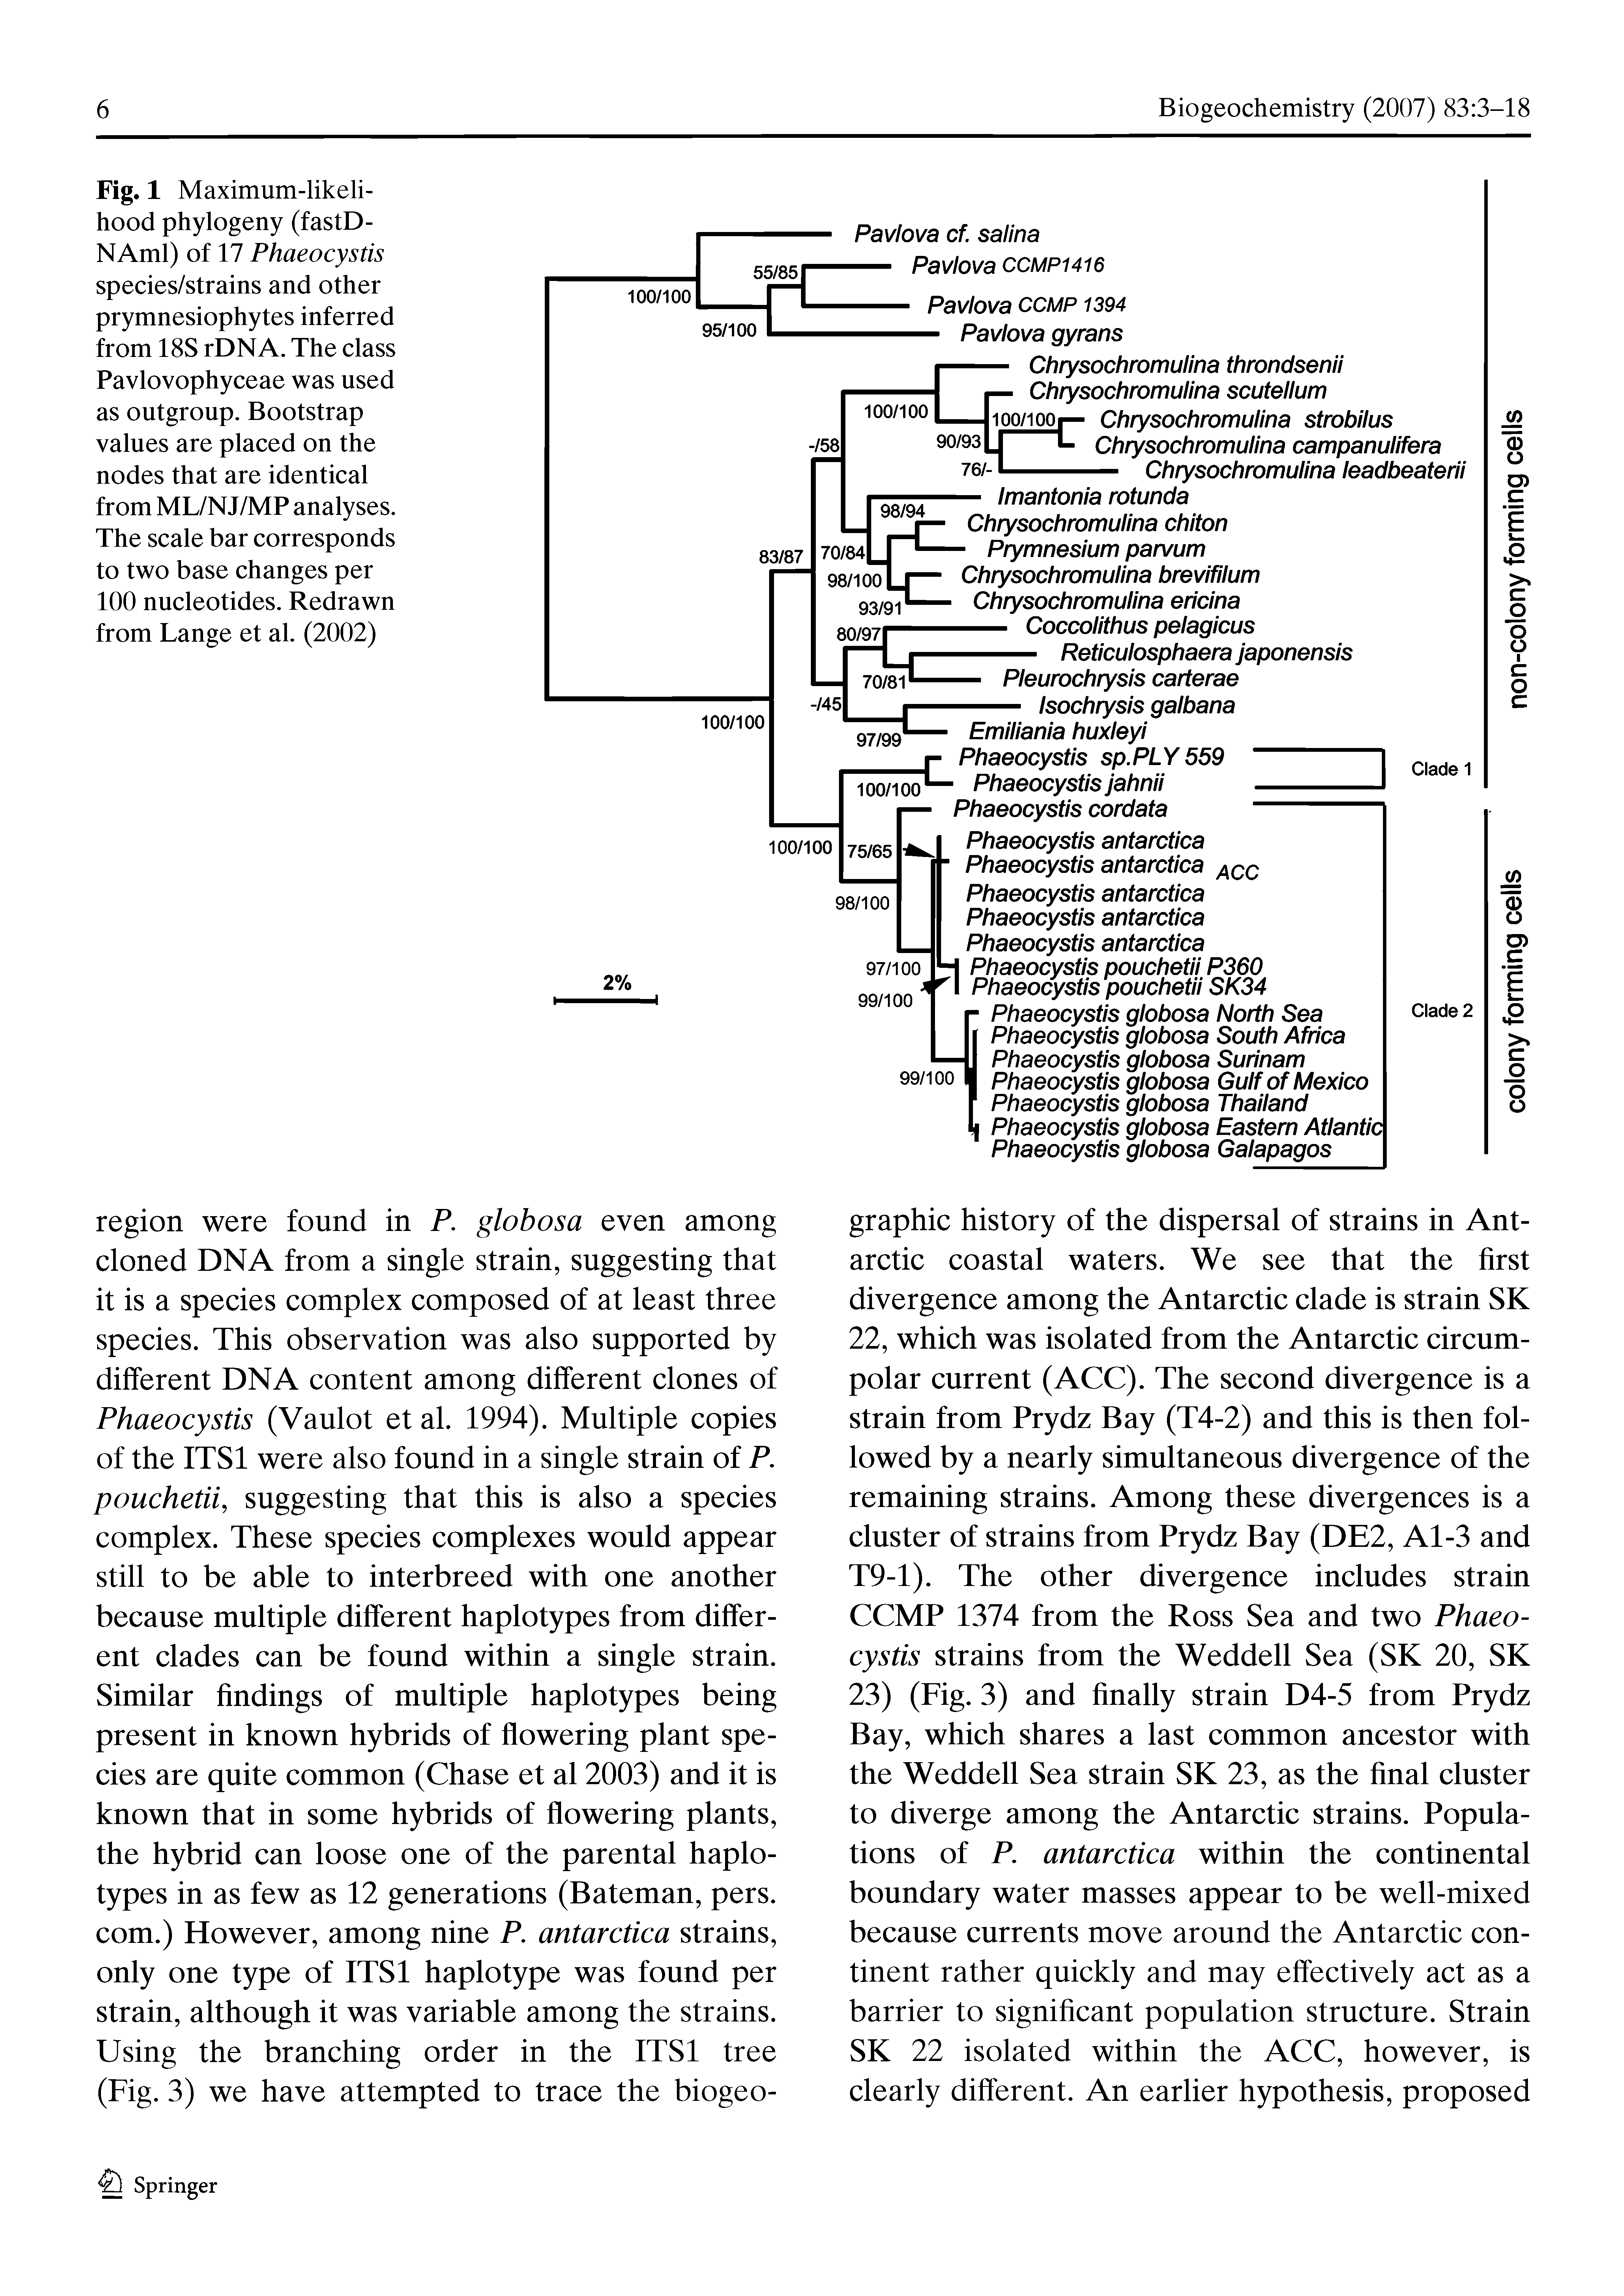 Fig. 1 Maximum-likelihood phytogeny (fastD-NAml) of 17 Phaeocystis species/strains and other prymnesiophytes inferred from 18S rDNA. The class Pavlovophyceae was used as outgroup. Bootstrap values are placed on the nodes that are identical from ML/NJ/MP analyses. The scale bar corresponds to two base changes per 100 nucleotides. Redrawn from Lange et al. (2002)...